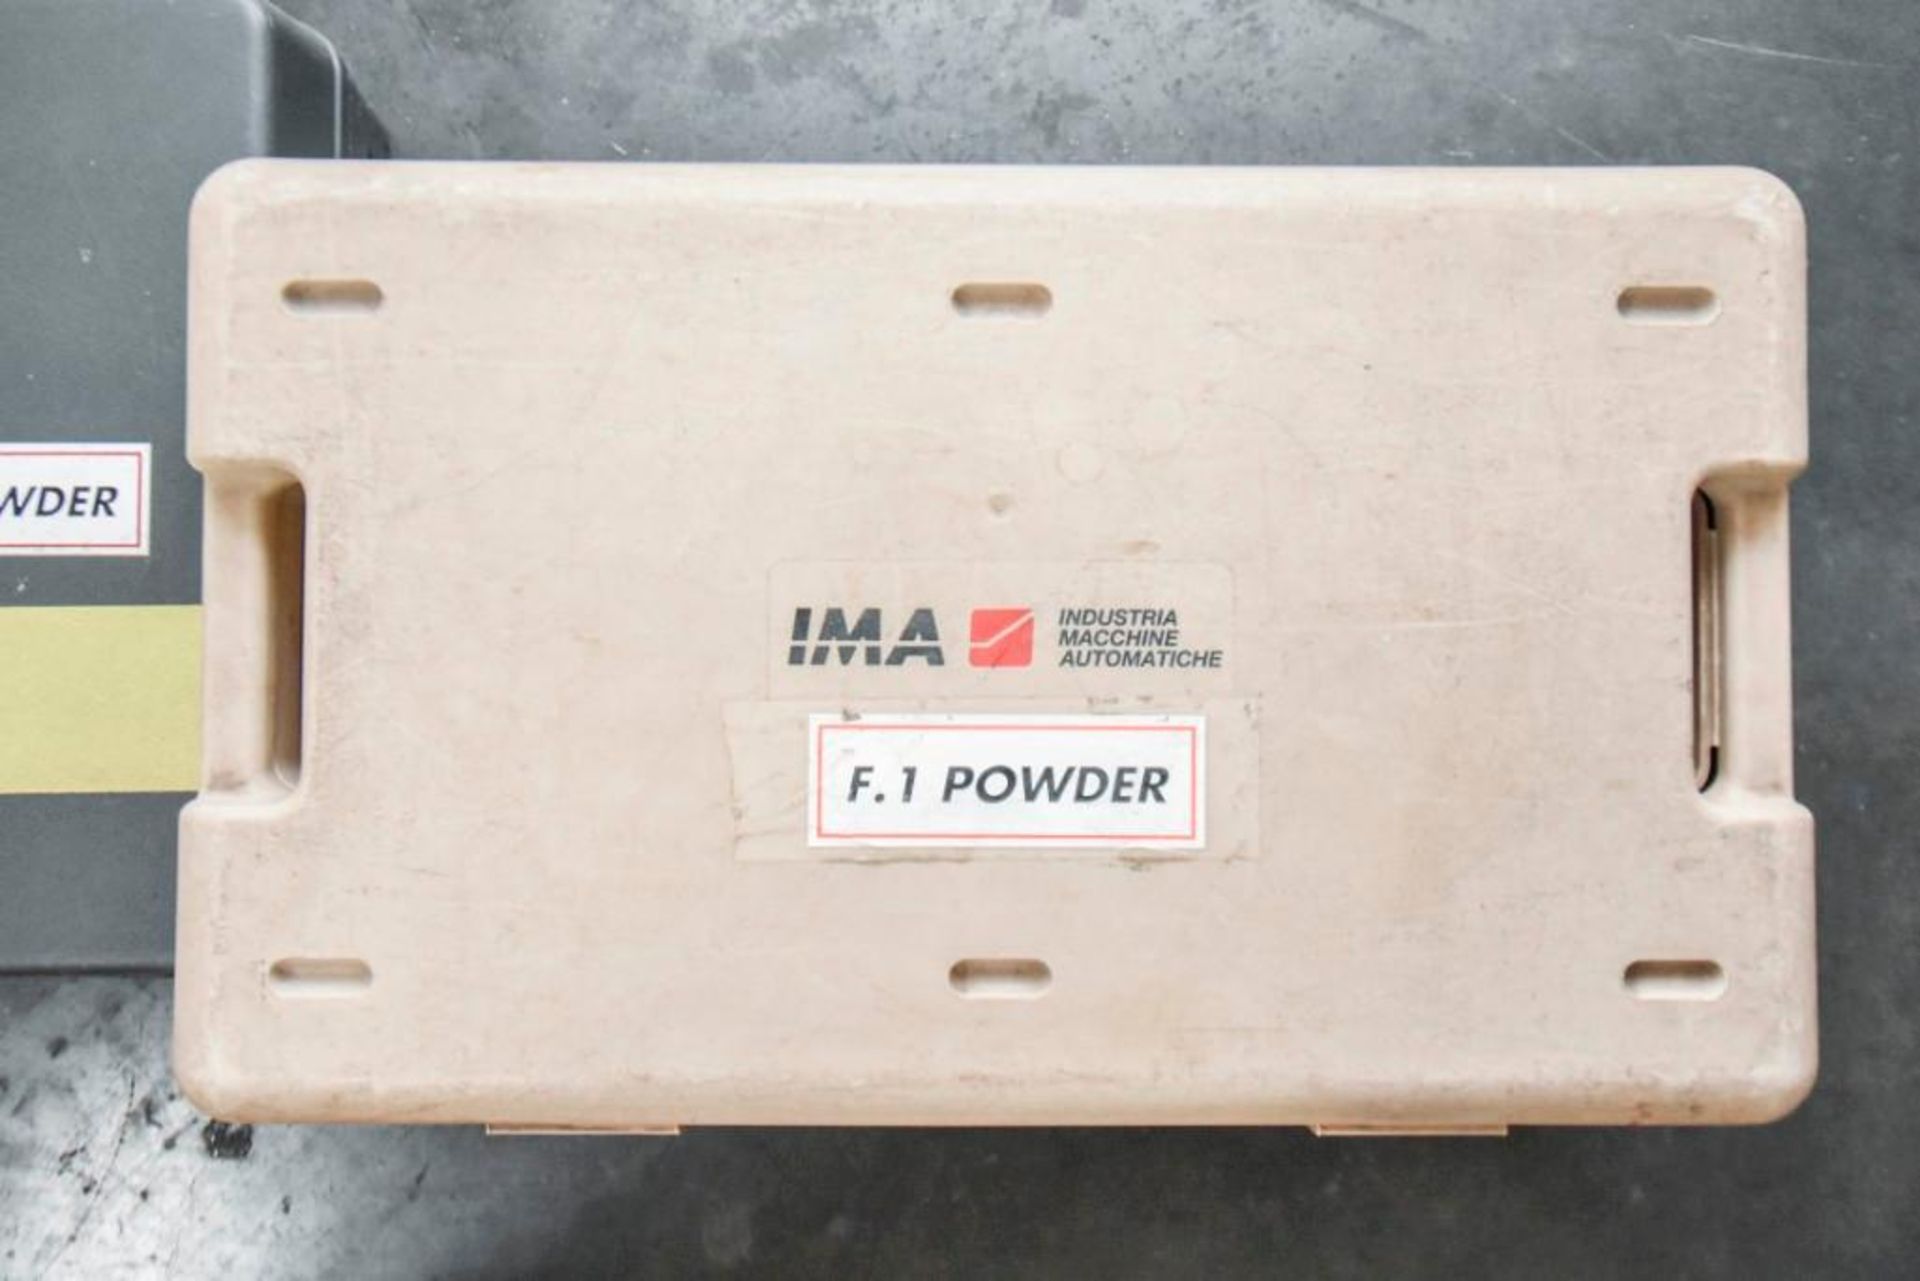 Ima 40 Partial Tooling Set Size 1 - Image 5 of 10